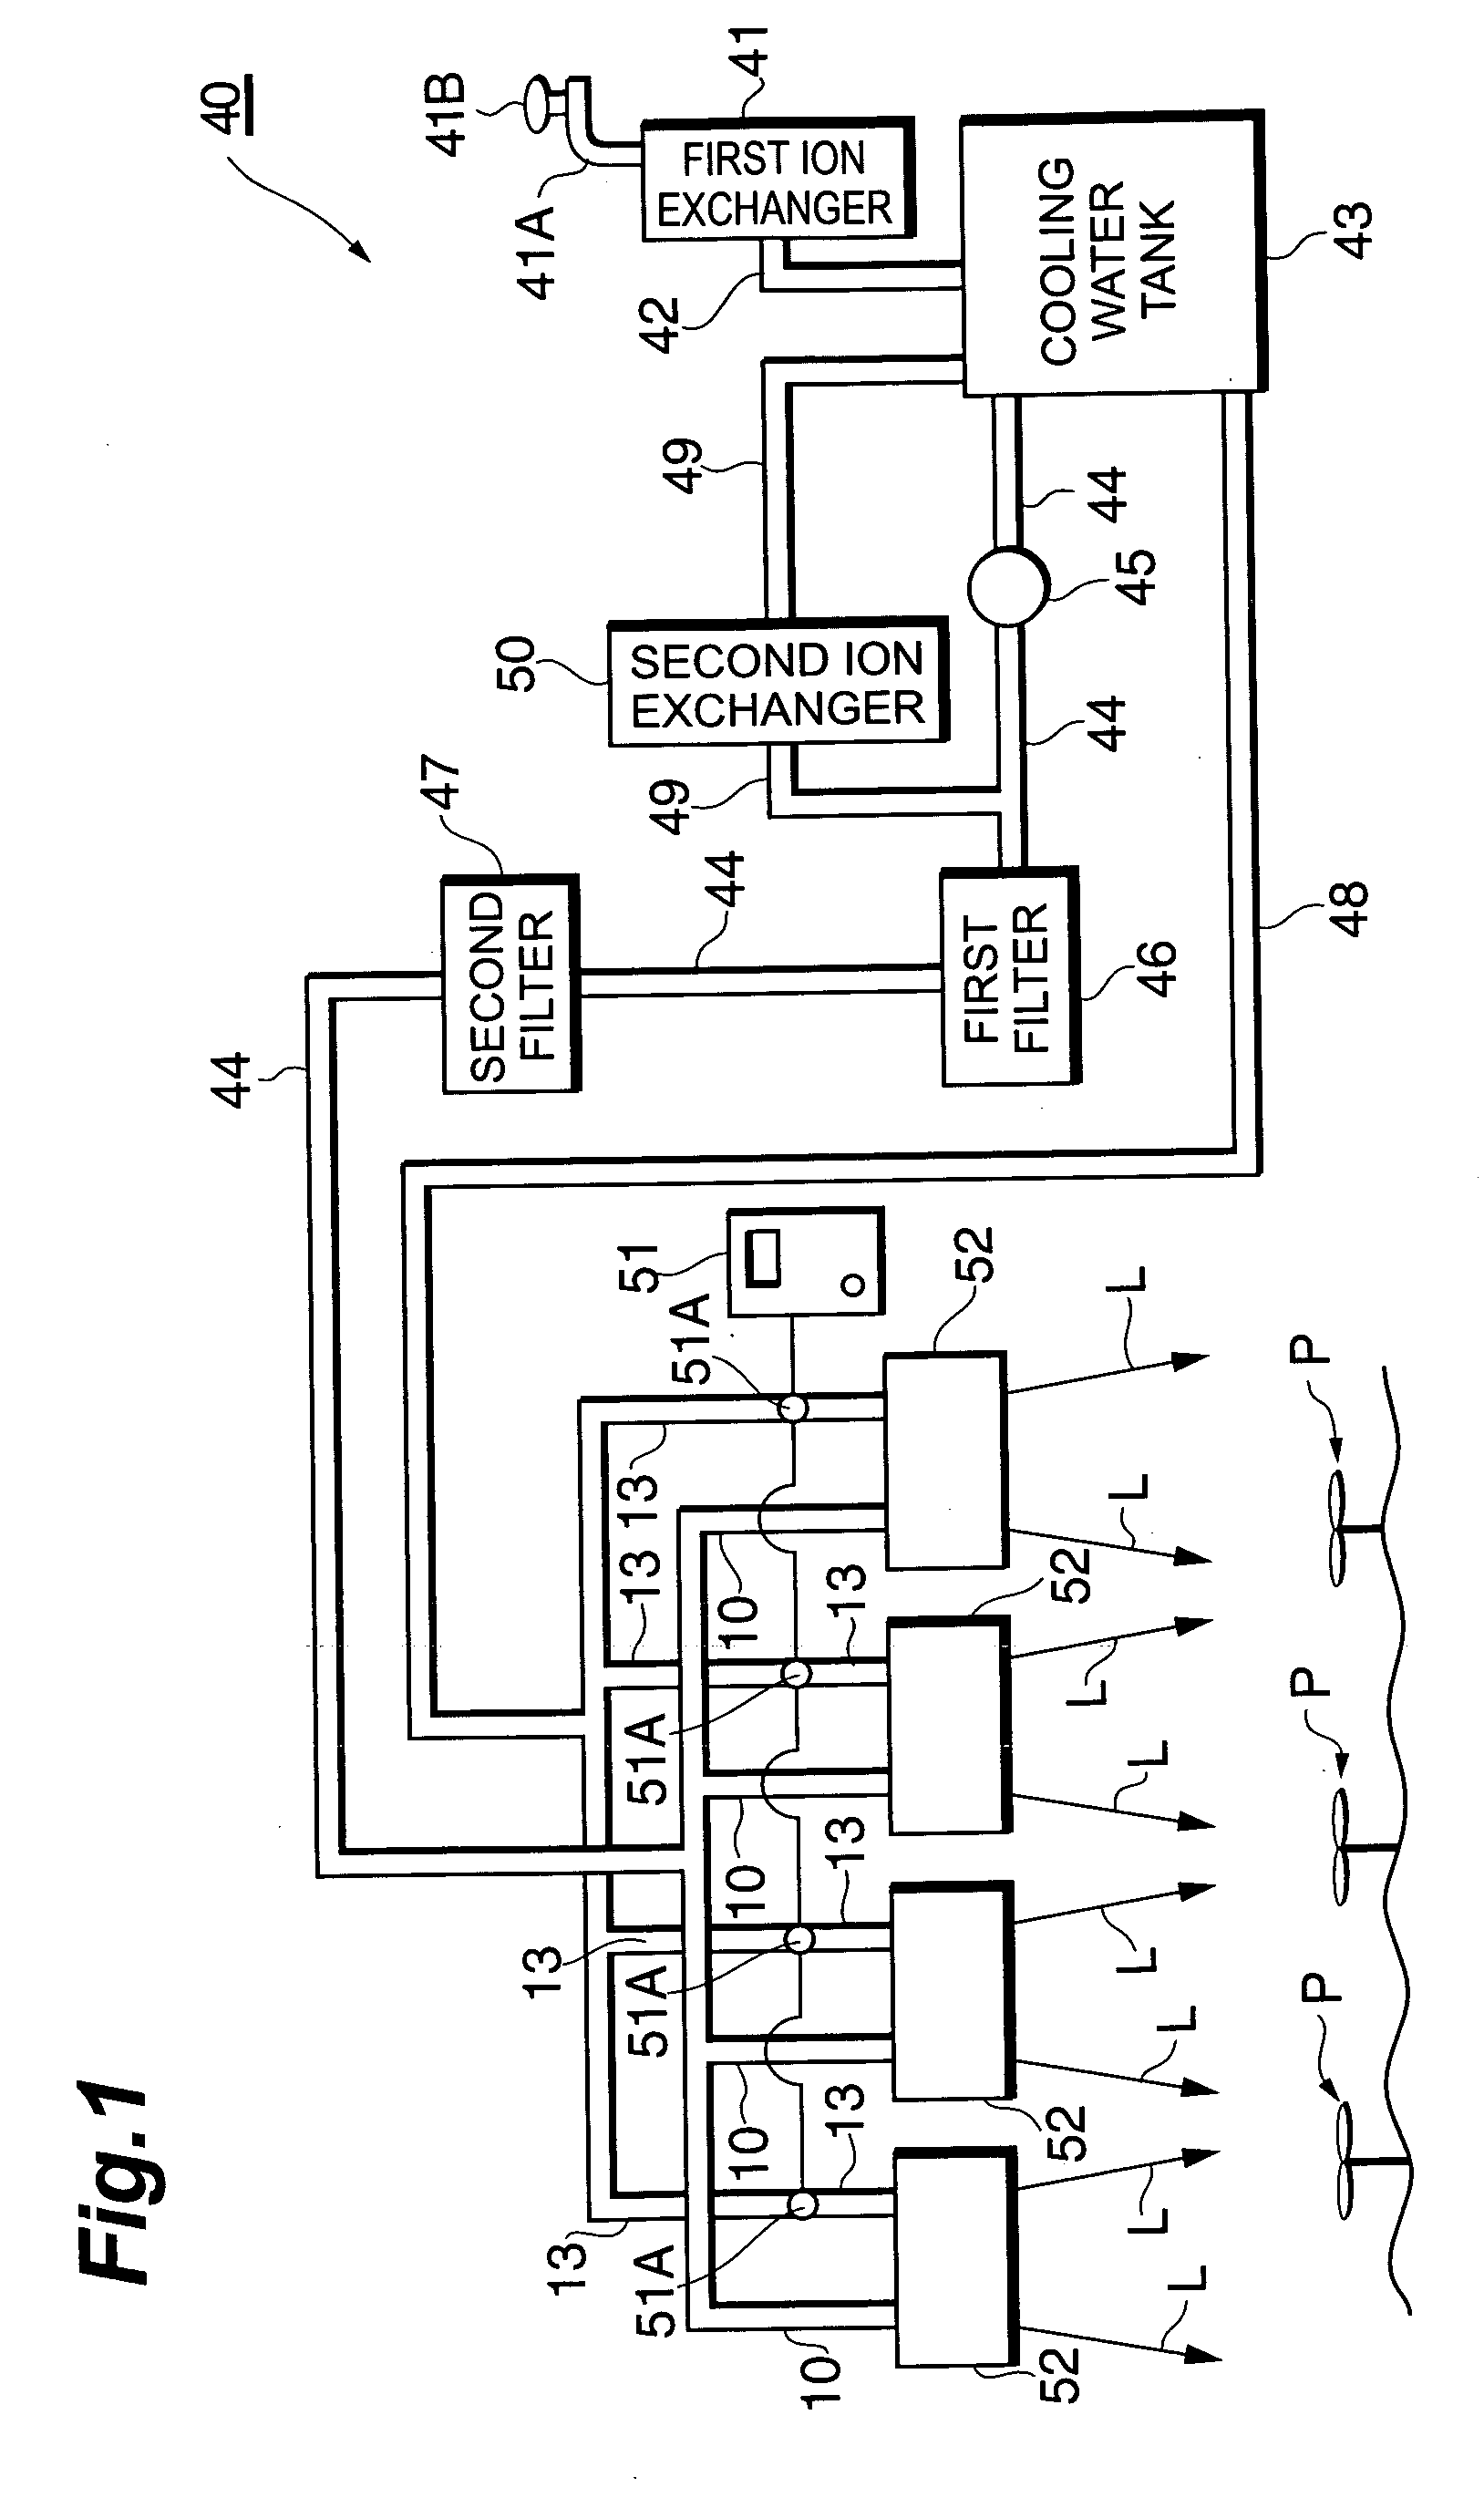 Semiconductor light emitting device and plant cultivating system